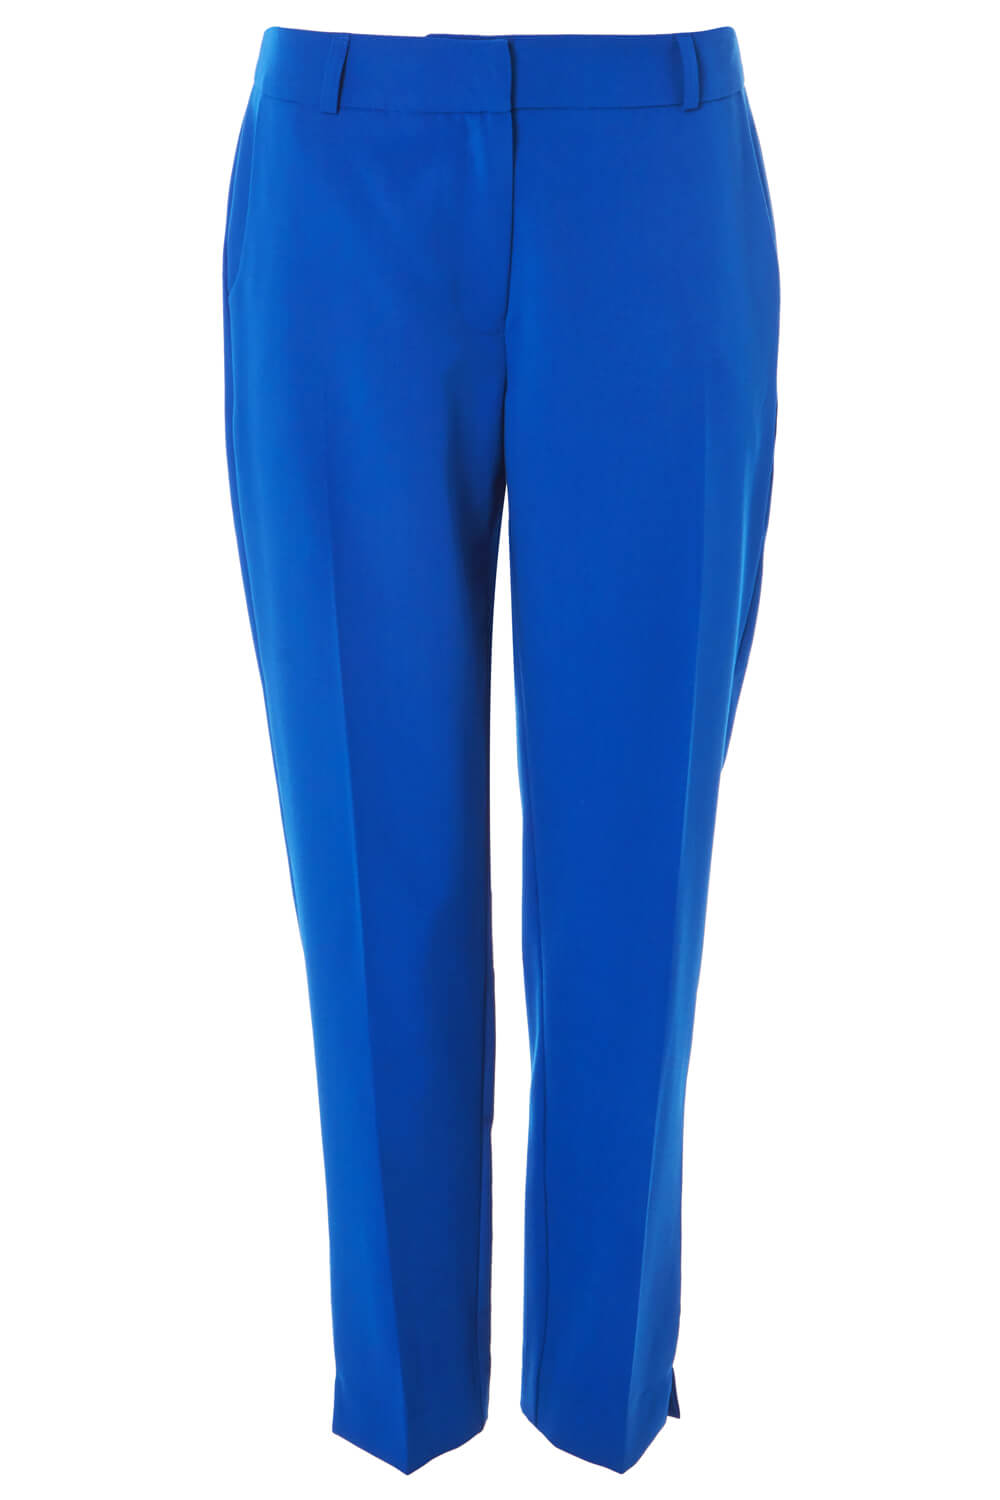 Royal Blue Straight Leg Tapered Trousers, Image 5 of 5